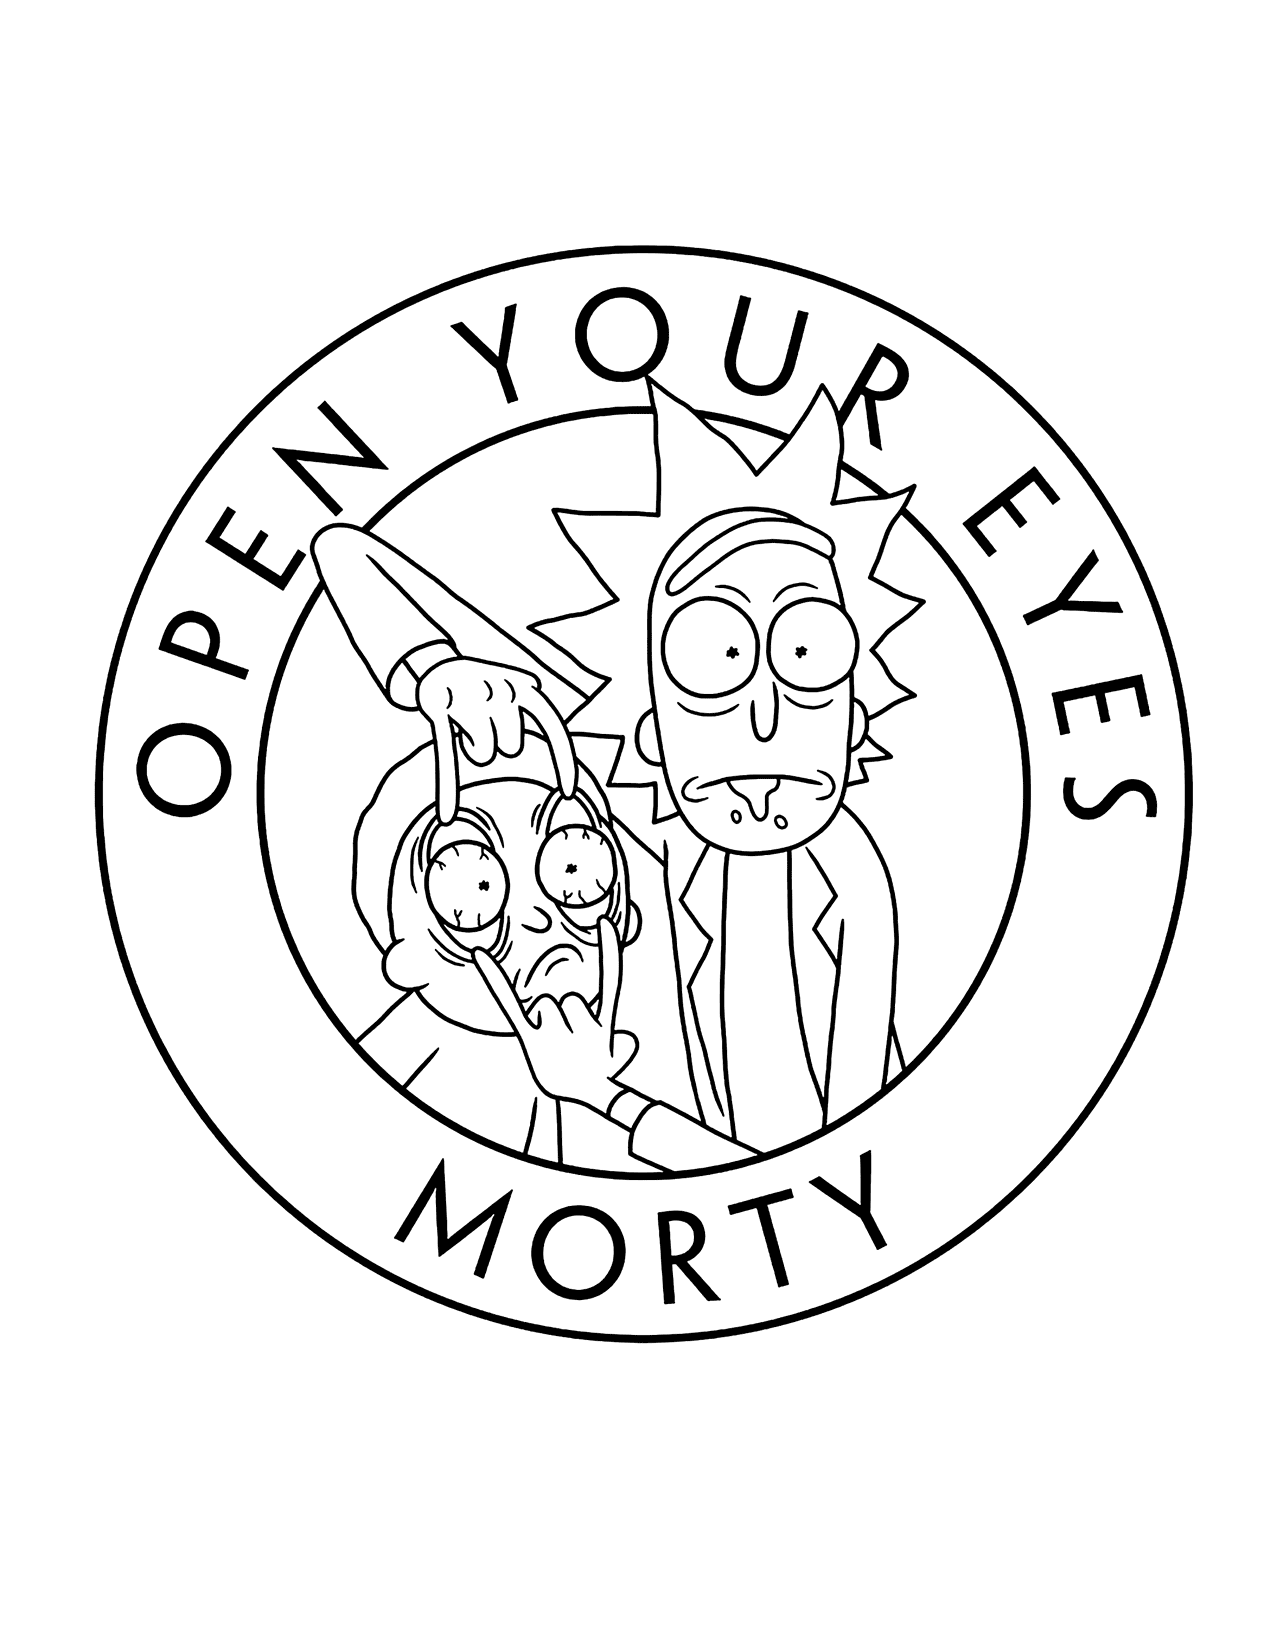 Open Your Eyes Morty Coloring Page